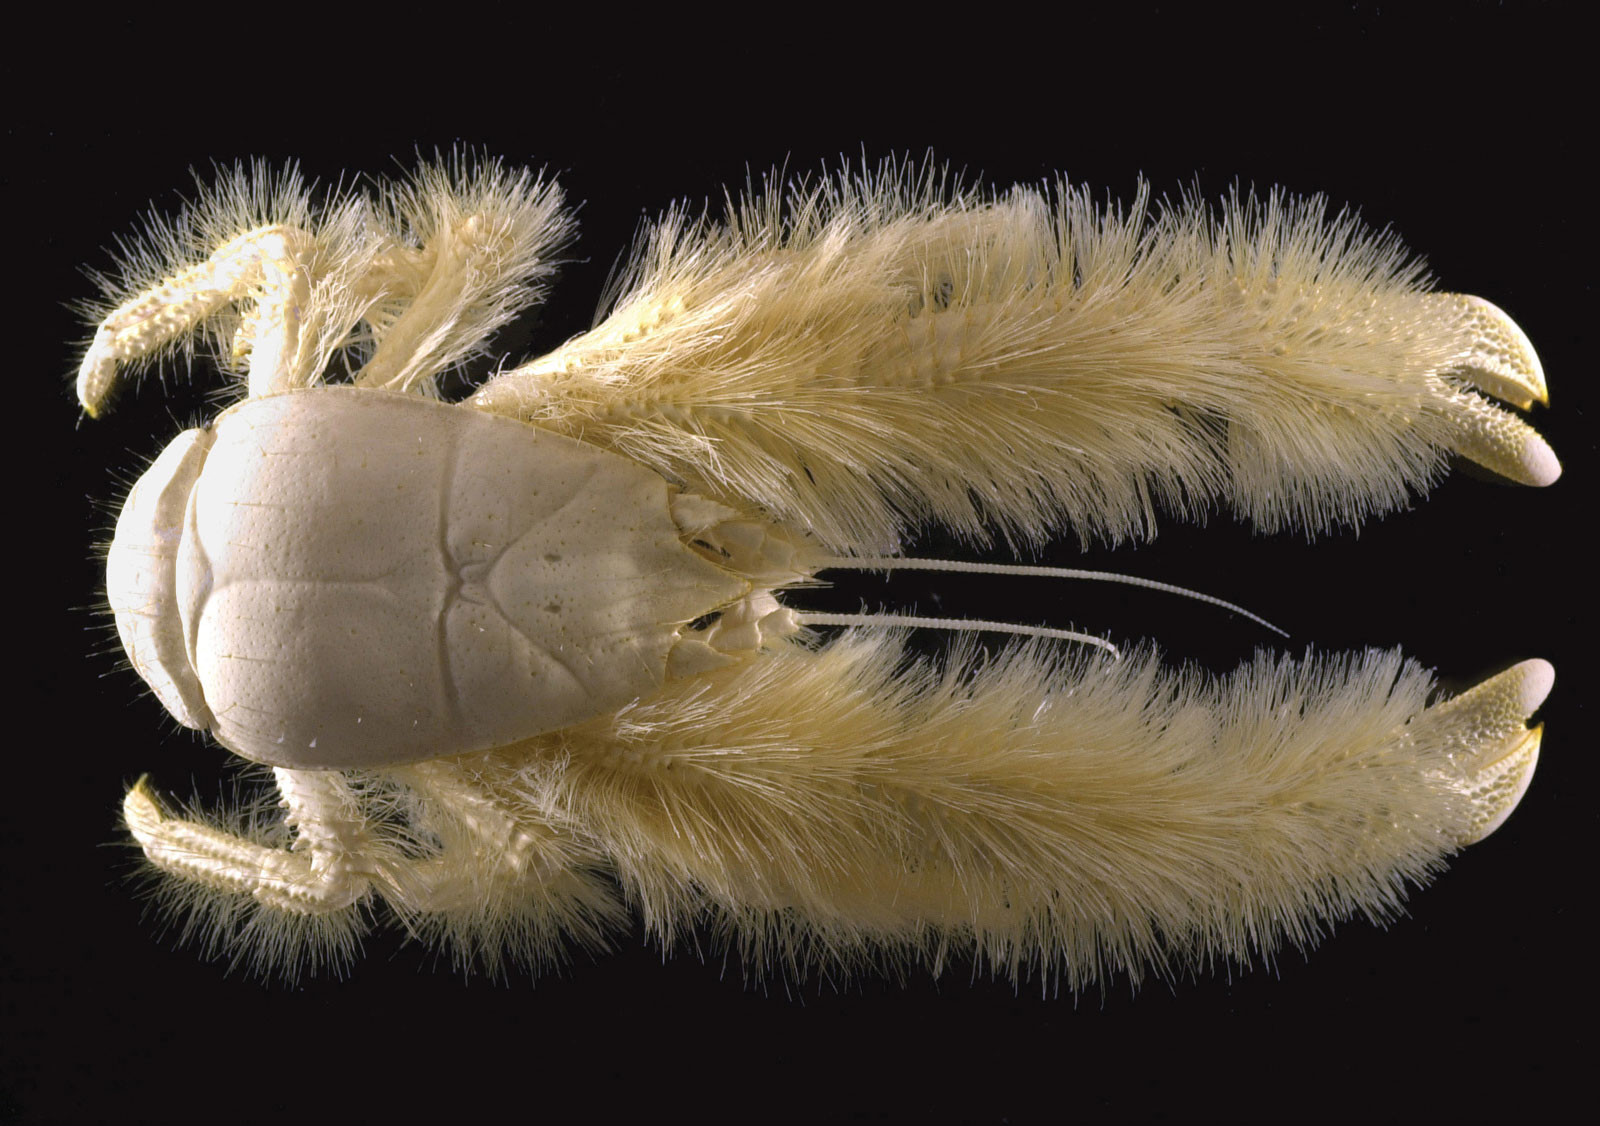 Also known as the Kiwaidae, this crab is a type of marine decapod living at deep-sea hydrothermal vents and cold seeps.  The animals are commonly referred to as "yeti crabs" because of their claws and legs, which are white and appear to be furry like the mythical yeti.